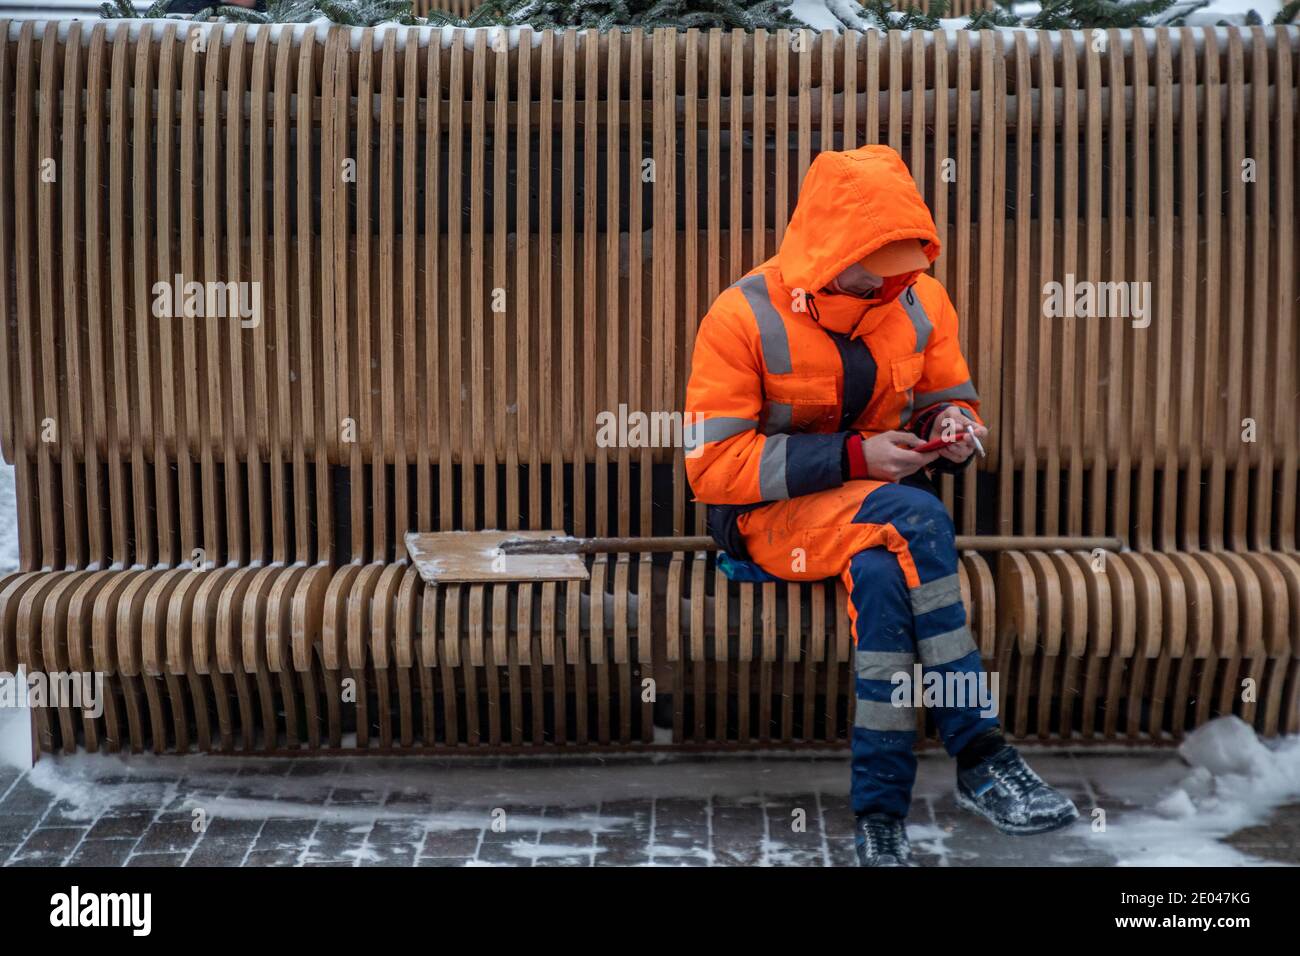 Moscow, Russia. 25th of December, 2020 An employees of a municipal service wearing face masks rests after cleaning the fallen snow on Manegnaya square in the center of Moscow on New Year's Eve, Russia Stock Photo